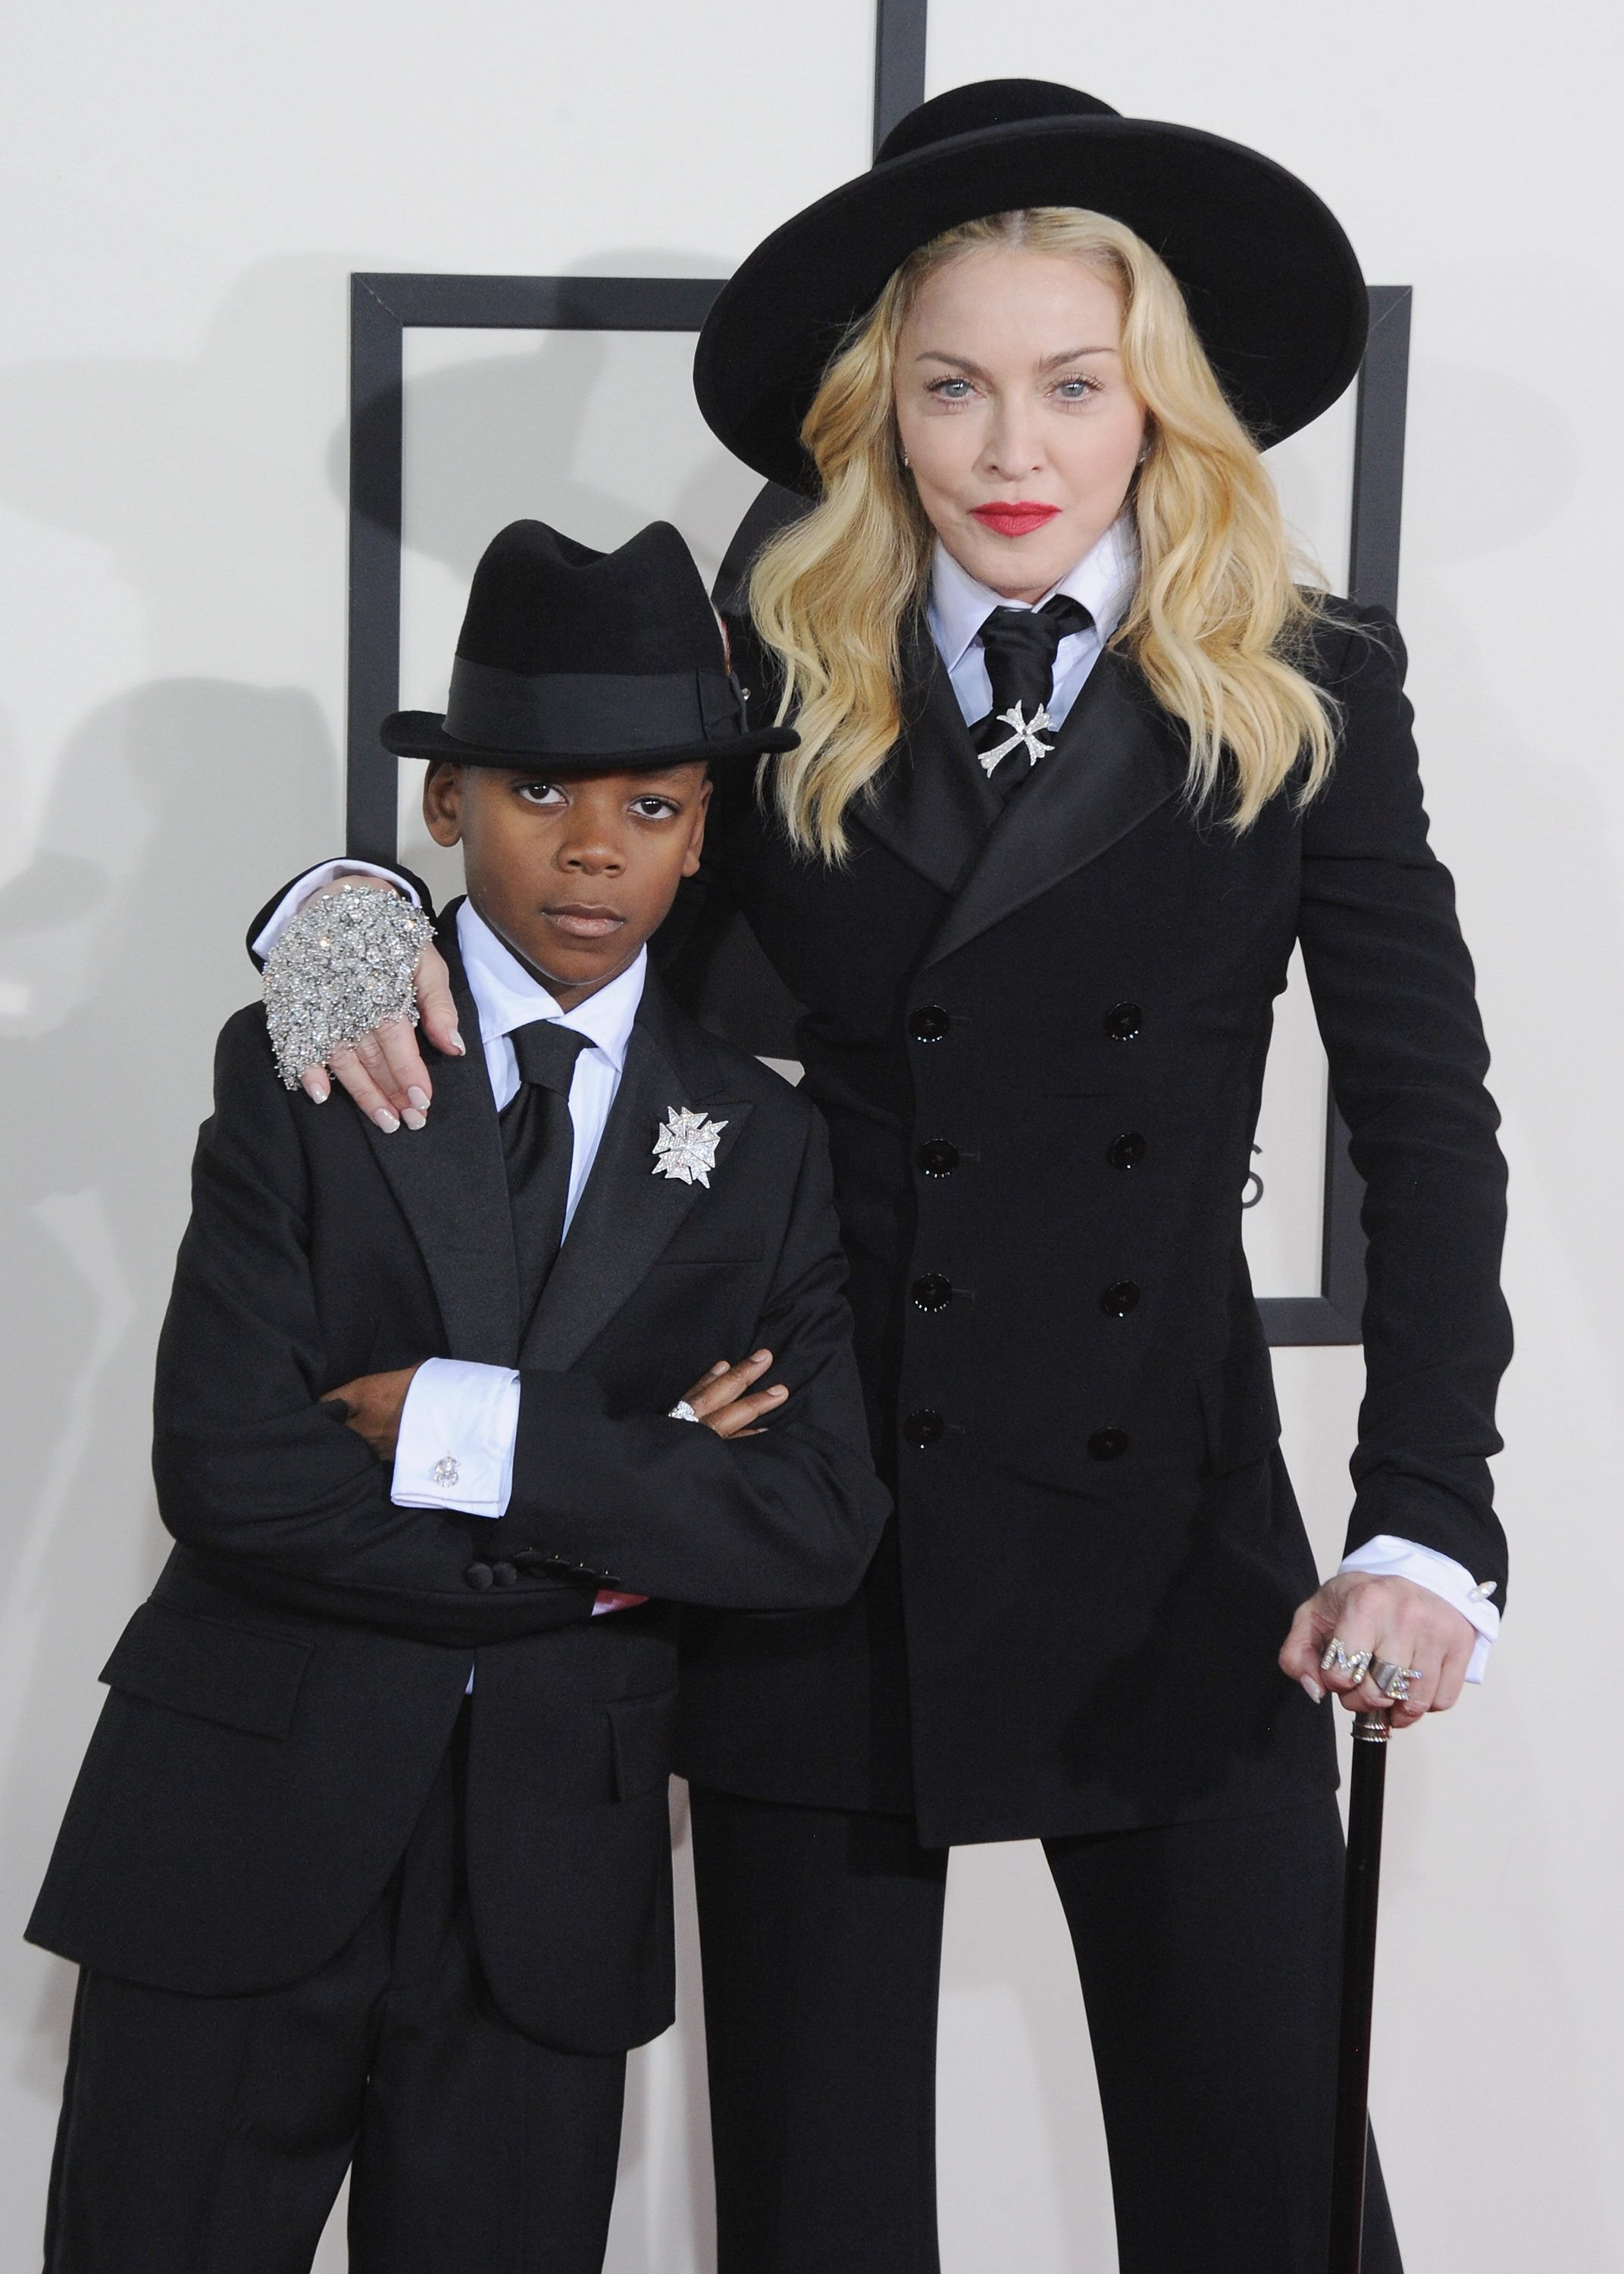 Madonna and her son David Banda Mwale Ciccone Ritchie at the 56th Grammy Awards at Staples Center on January 26, 2014, in Los Angeles, California | Photo: Jon Kopaloff/FilmMagic/Getty Images